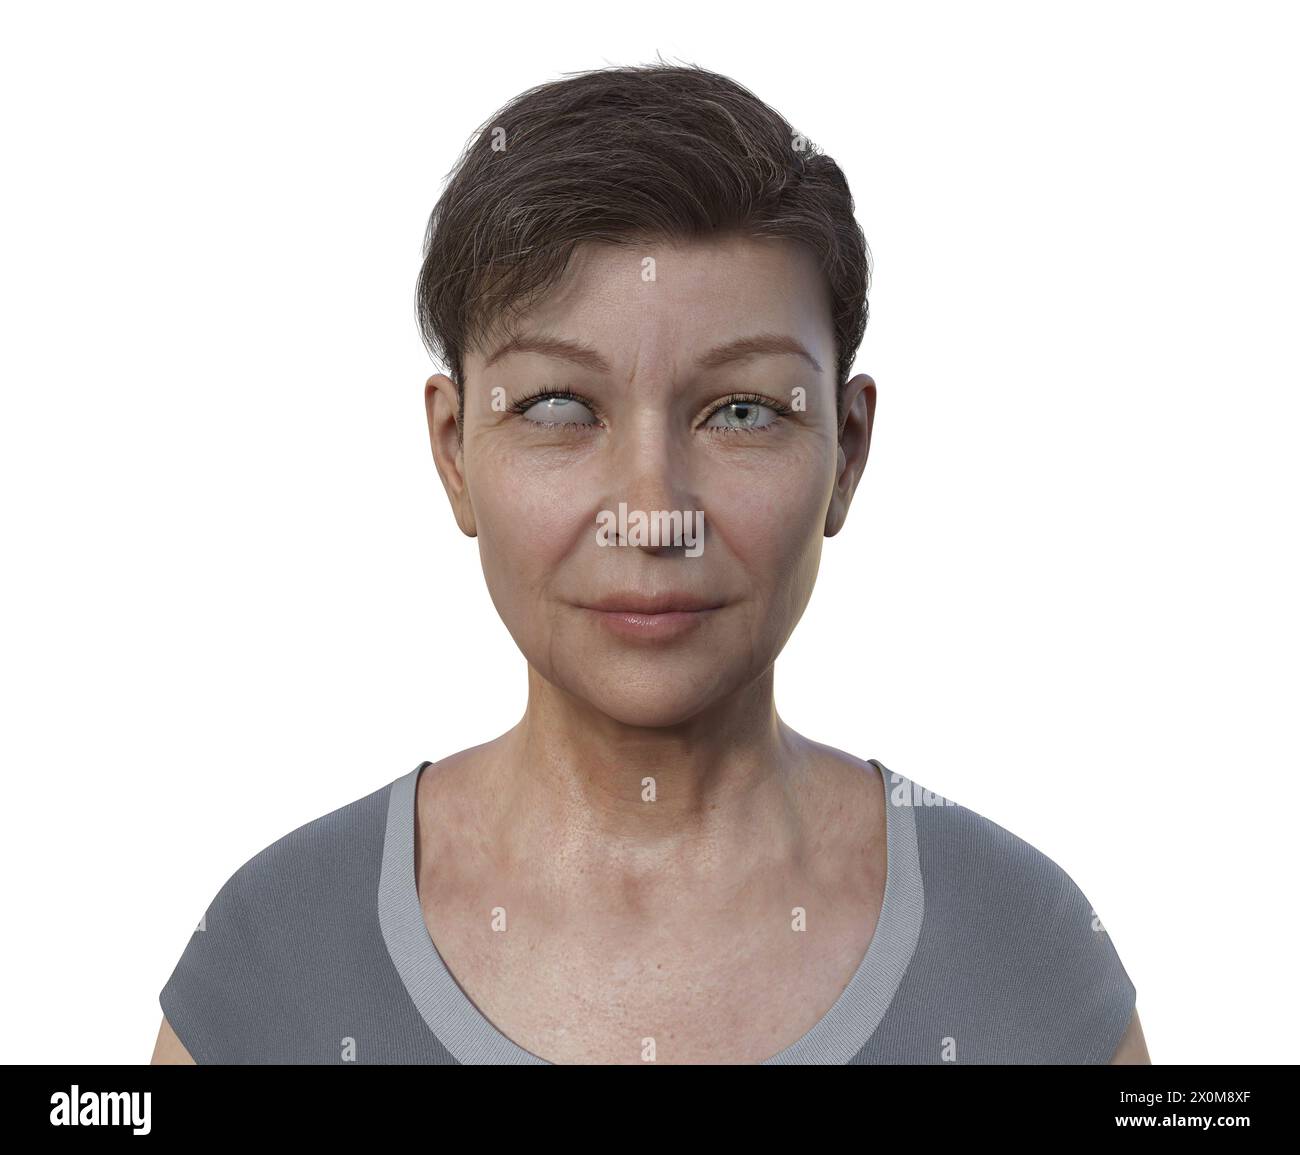 Illustration of a woman with hypotropia featuring upward eye misalignment. Stock Photo